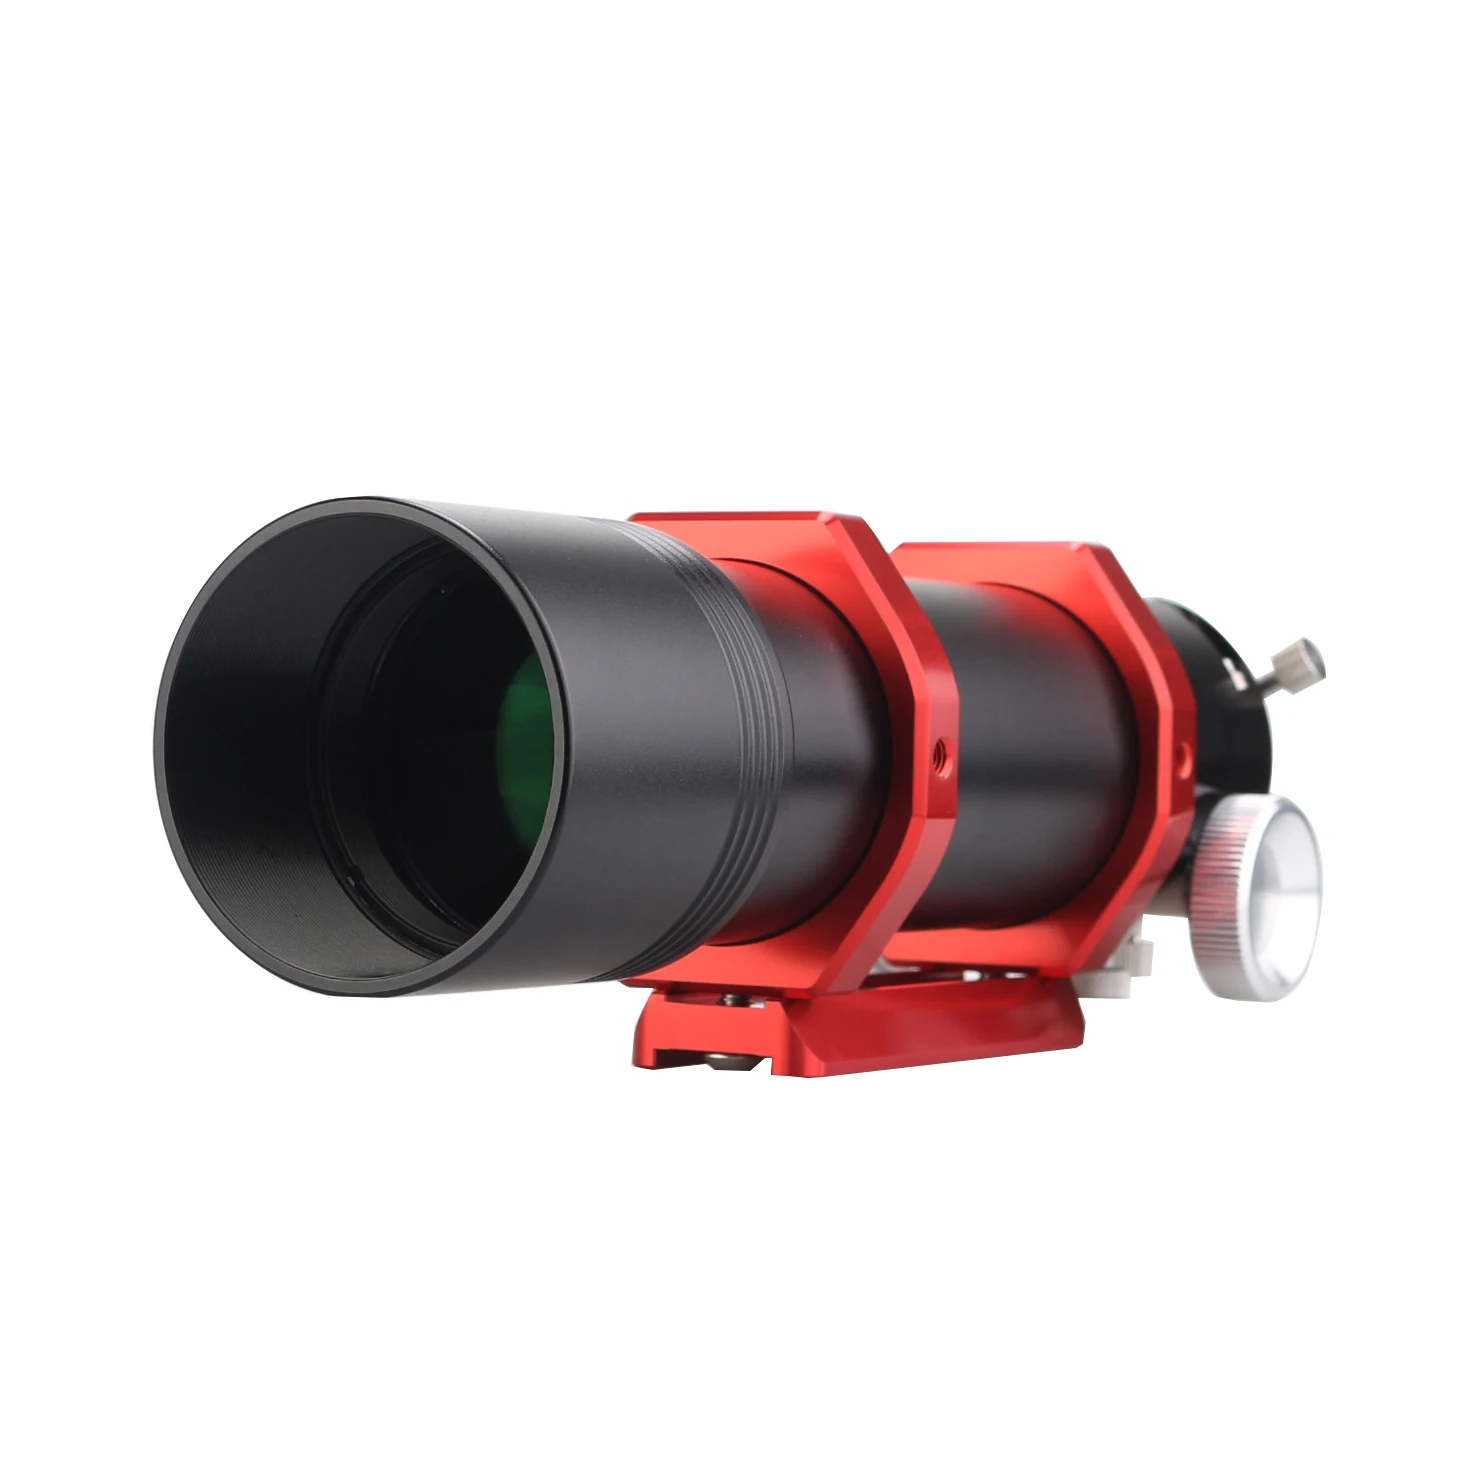 Price Review New 50mm F / 4 Fully Metal Multifunctional Guide Scope Refractor Telescope Optical Tube For Auto Guiding Cameras FinderscopLD2048A Online Shop